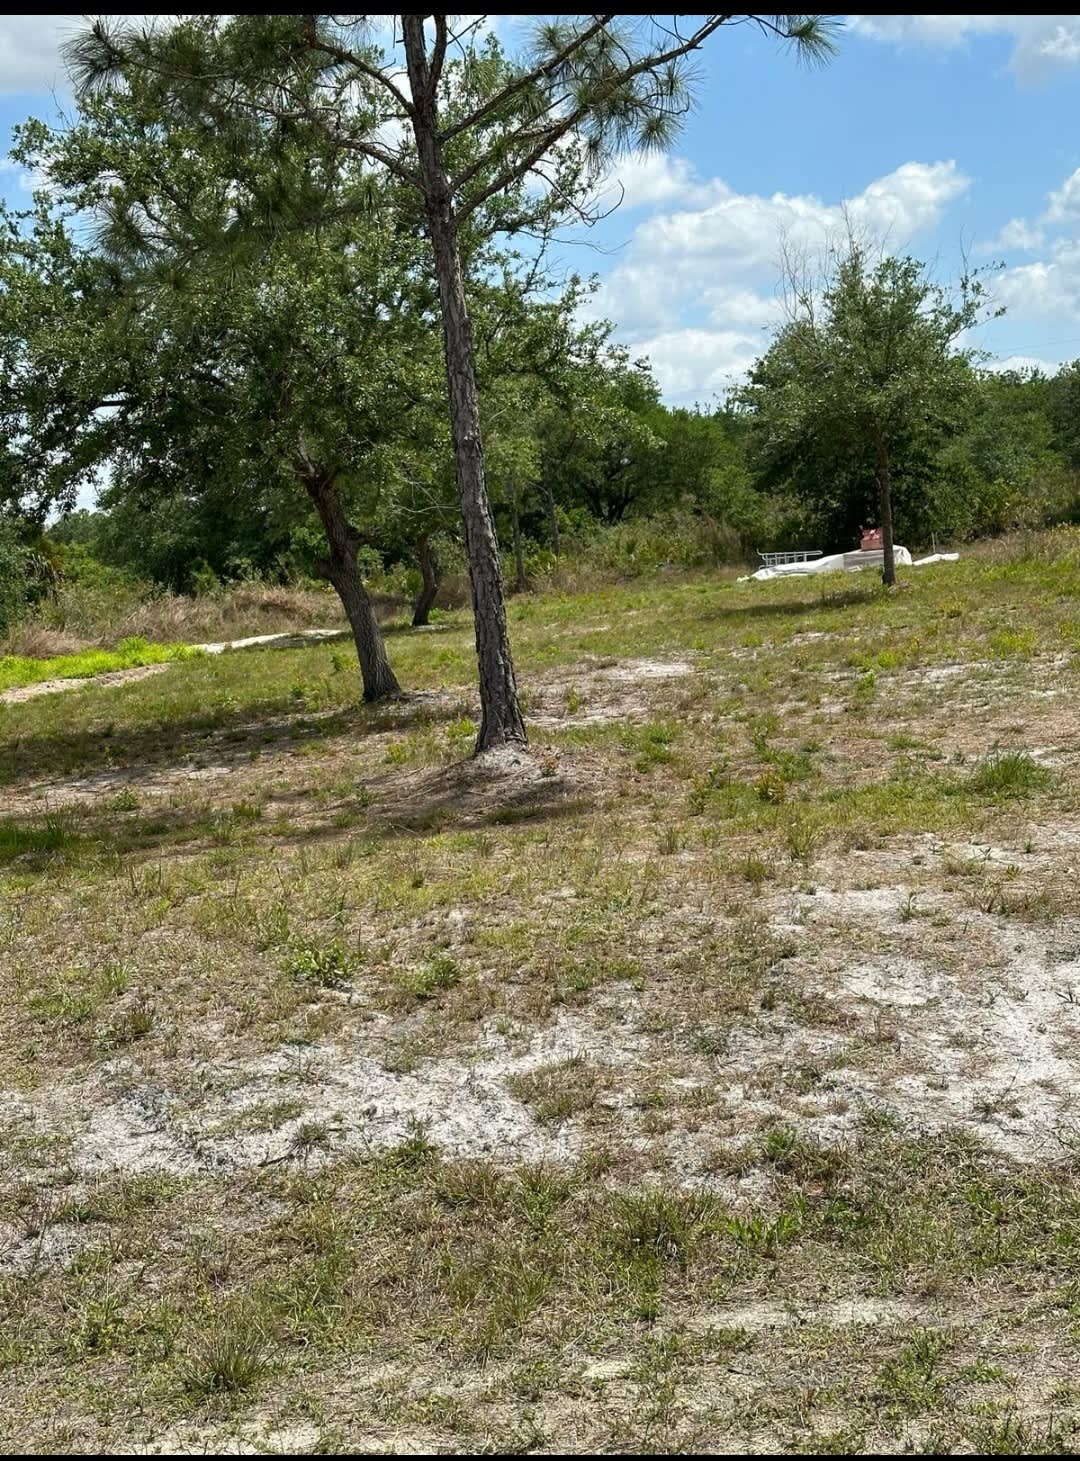 Cleared Half Acre Lot In Quiet Area